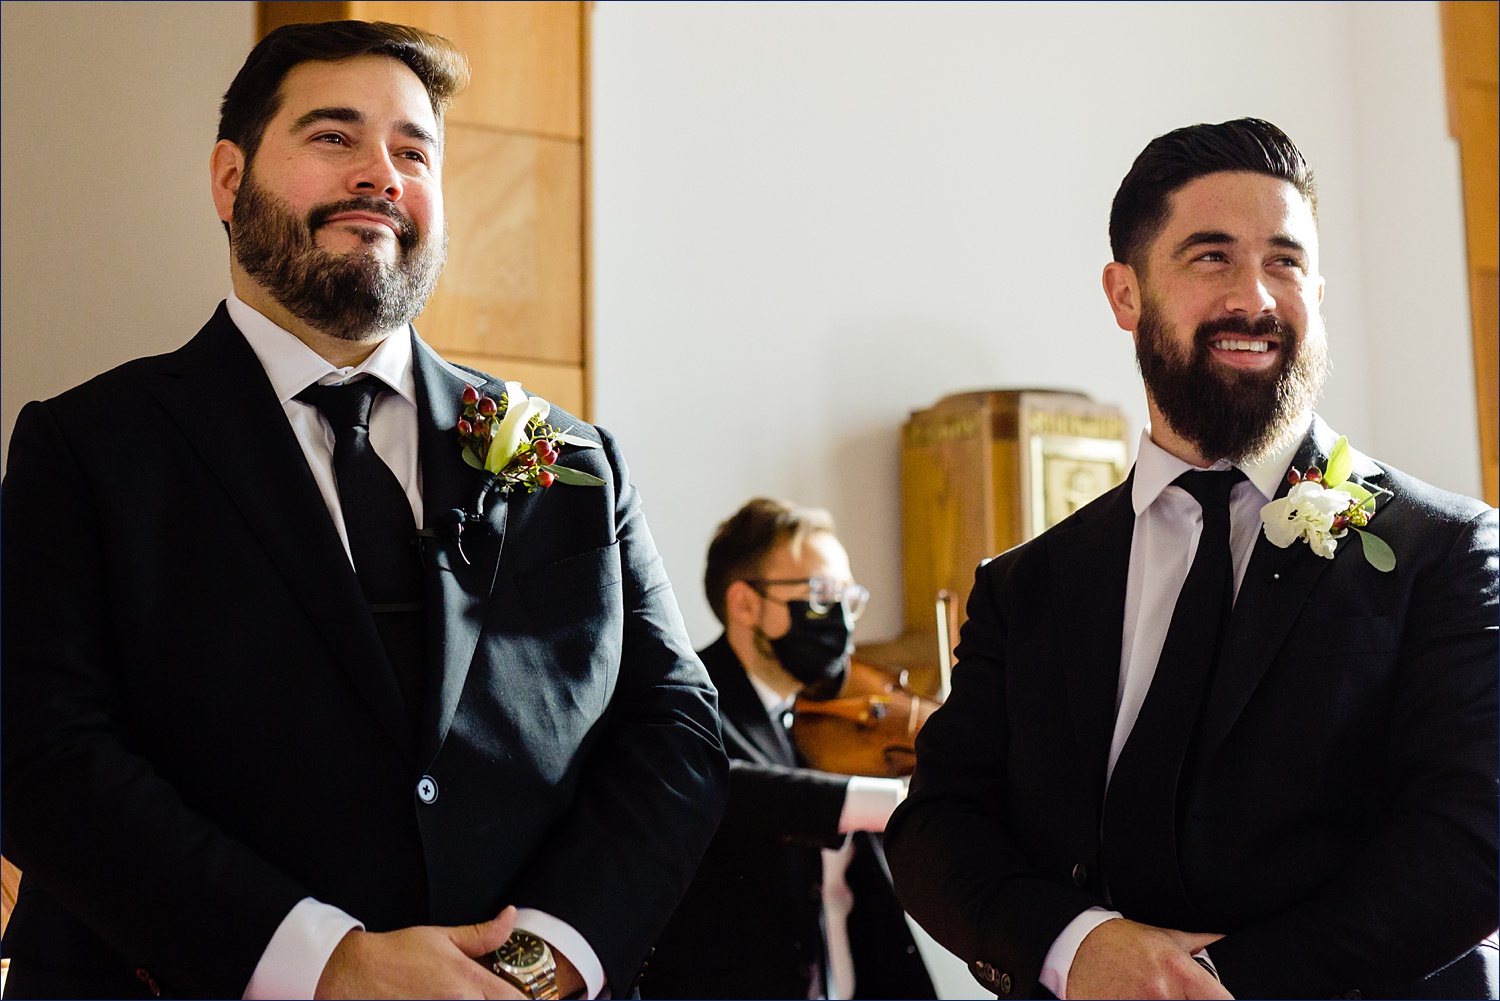 The groom sees his wife for the first time on the wedding day at the church and tears up